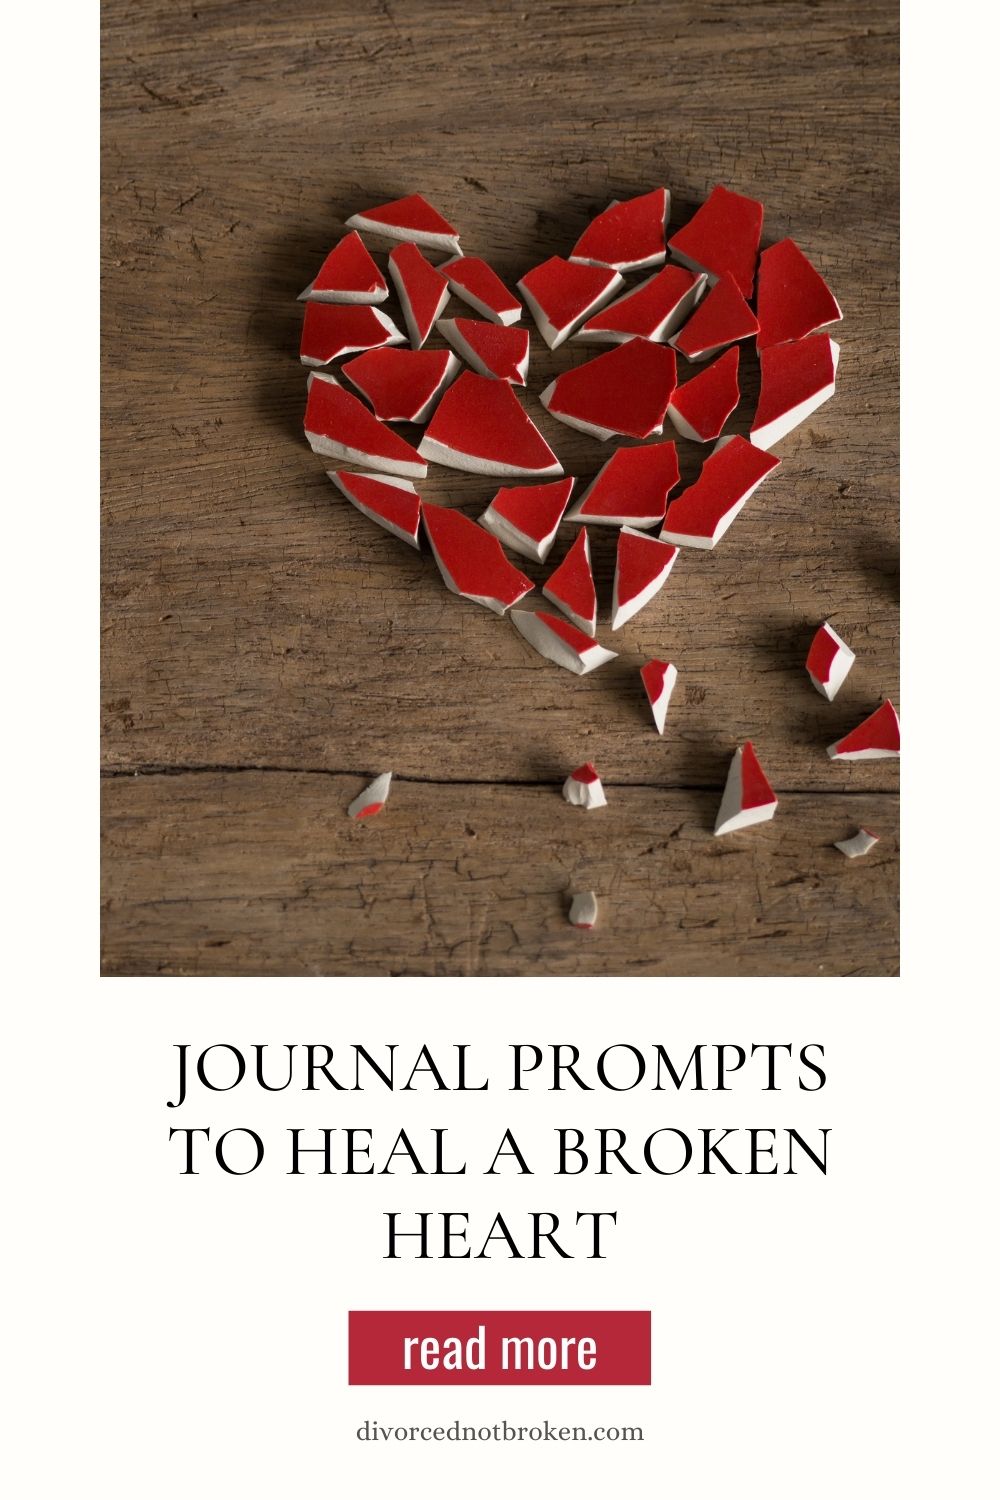 Journal Prompts to Heal a Broken Heart text with a shattered, red ceramic heart image above.